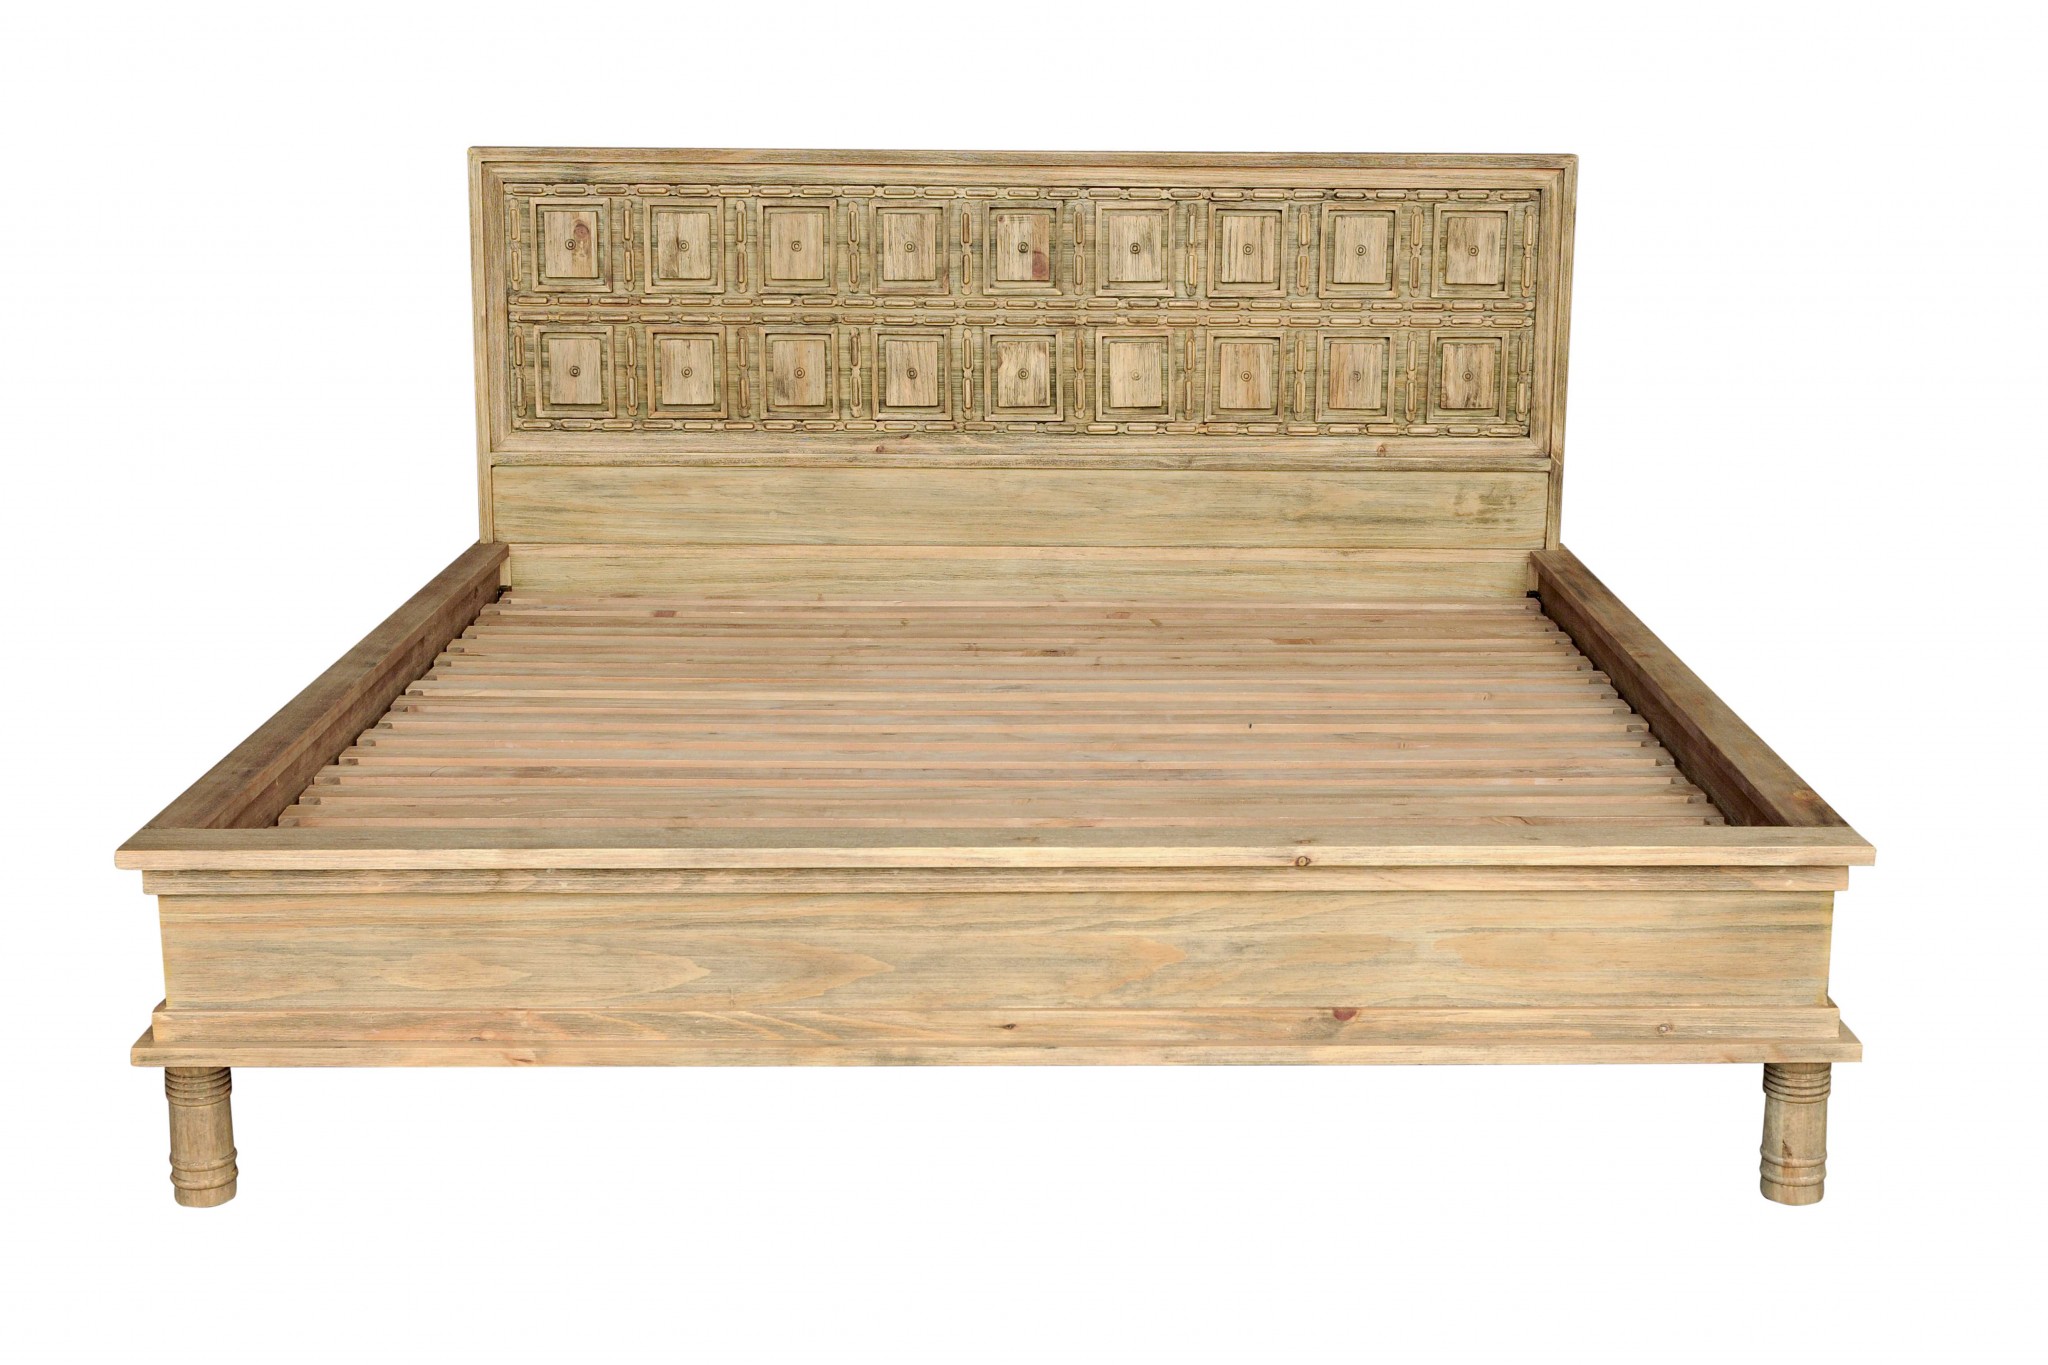 85" X 88" X 49" Natural Pine Wood King Size Bed